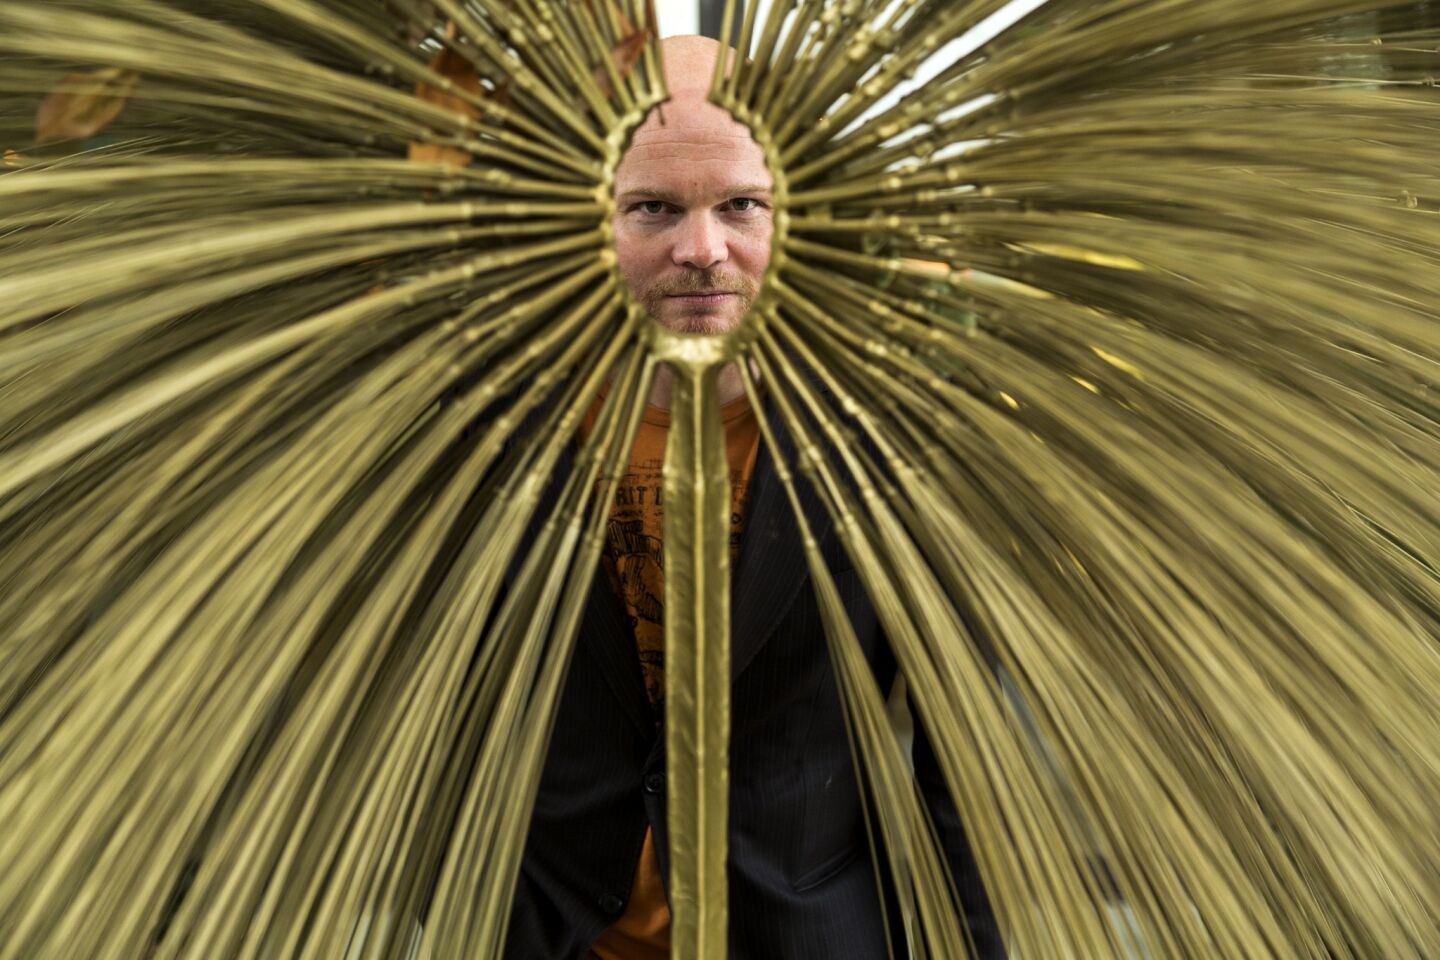 Director Grimur Hakonardson peers through a sculpture during a tour of the the estate of Walter and Leonore Annenberg at Sunnyland Center & Gardens in Rancho Mirage.